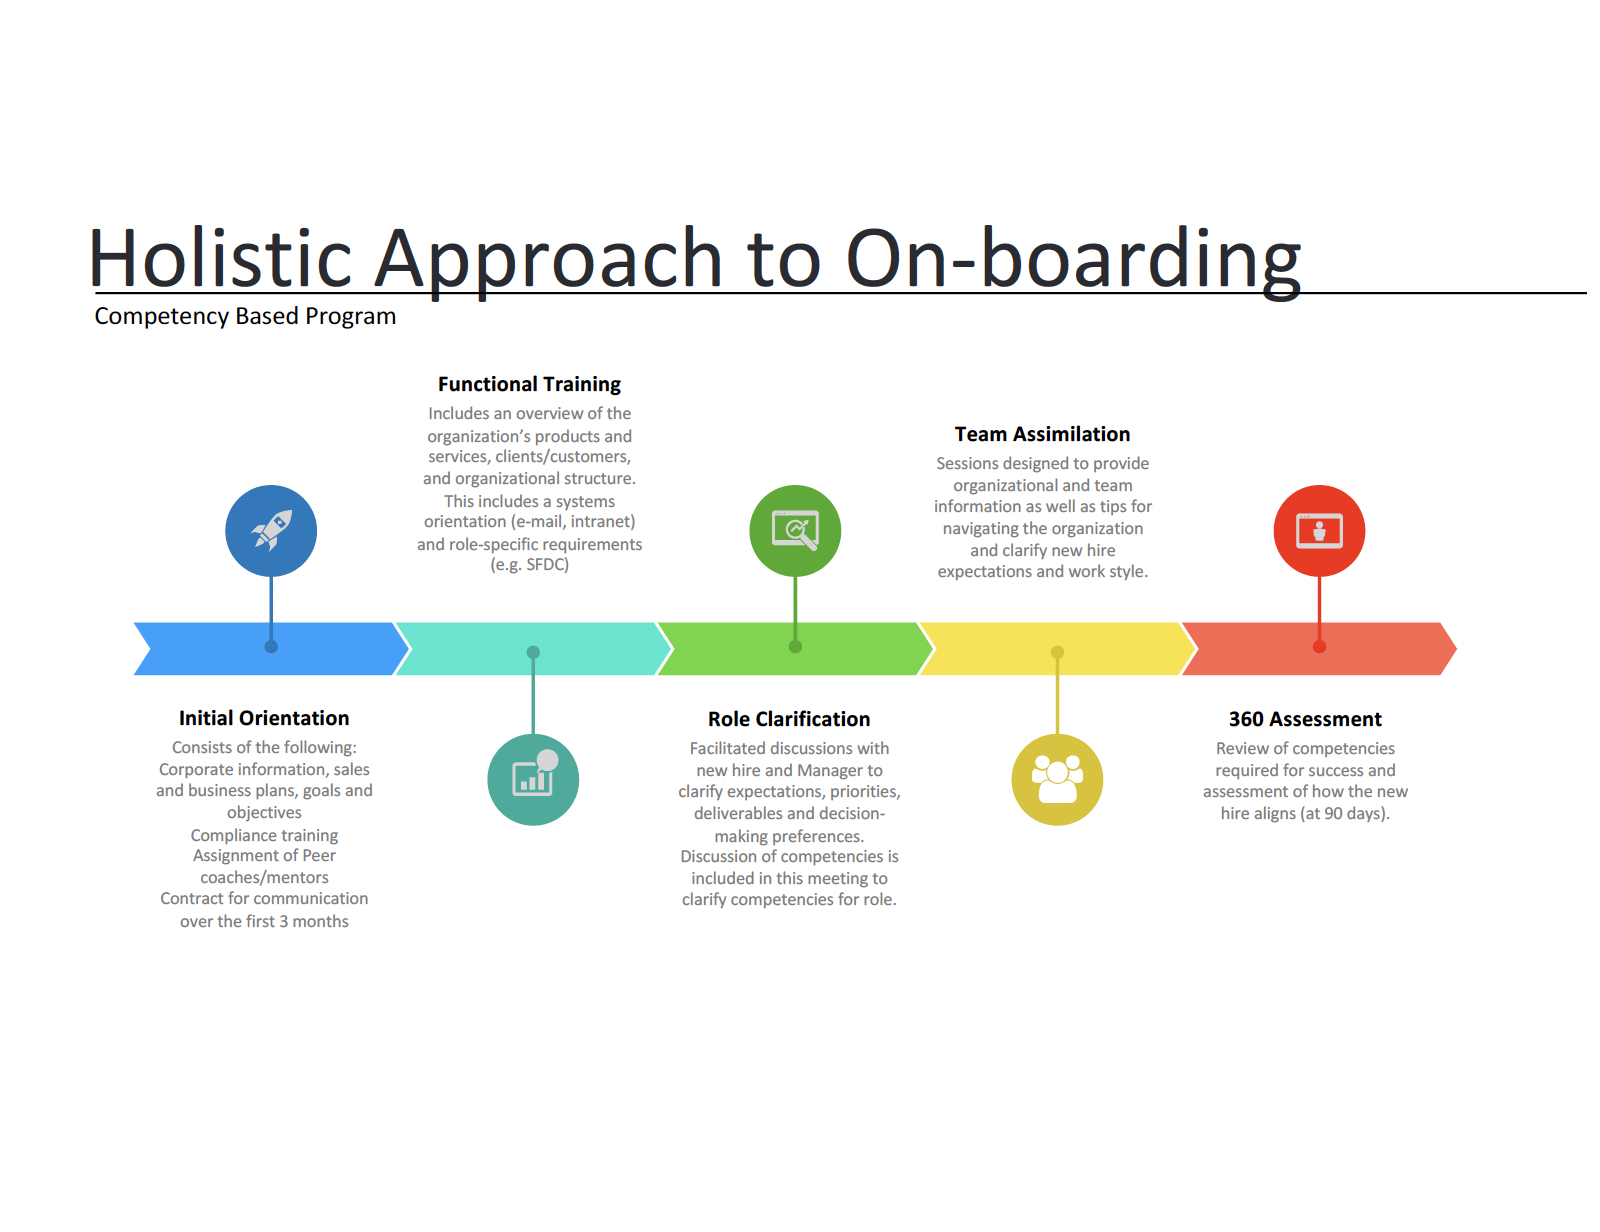 Holistic approach to onboarding